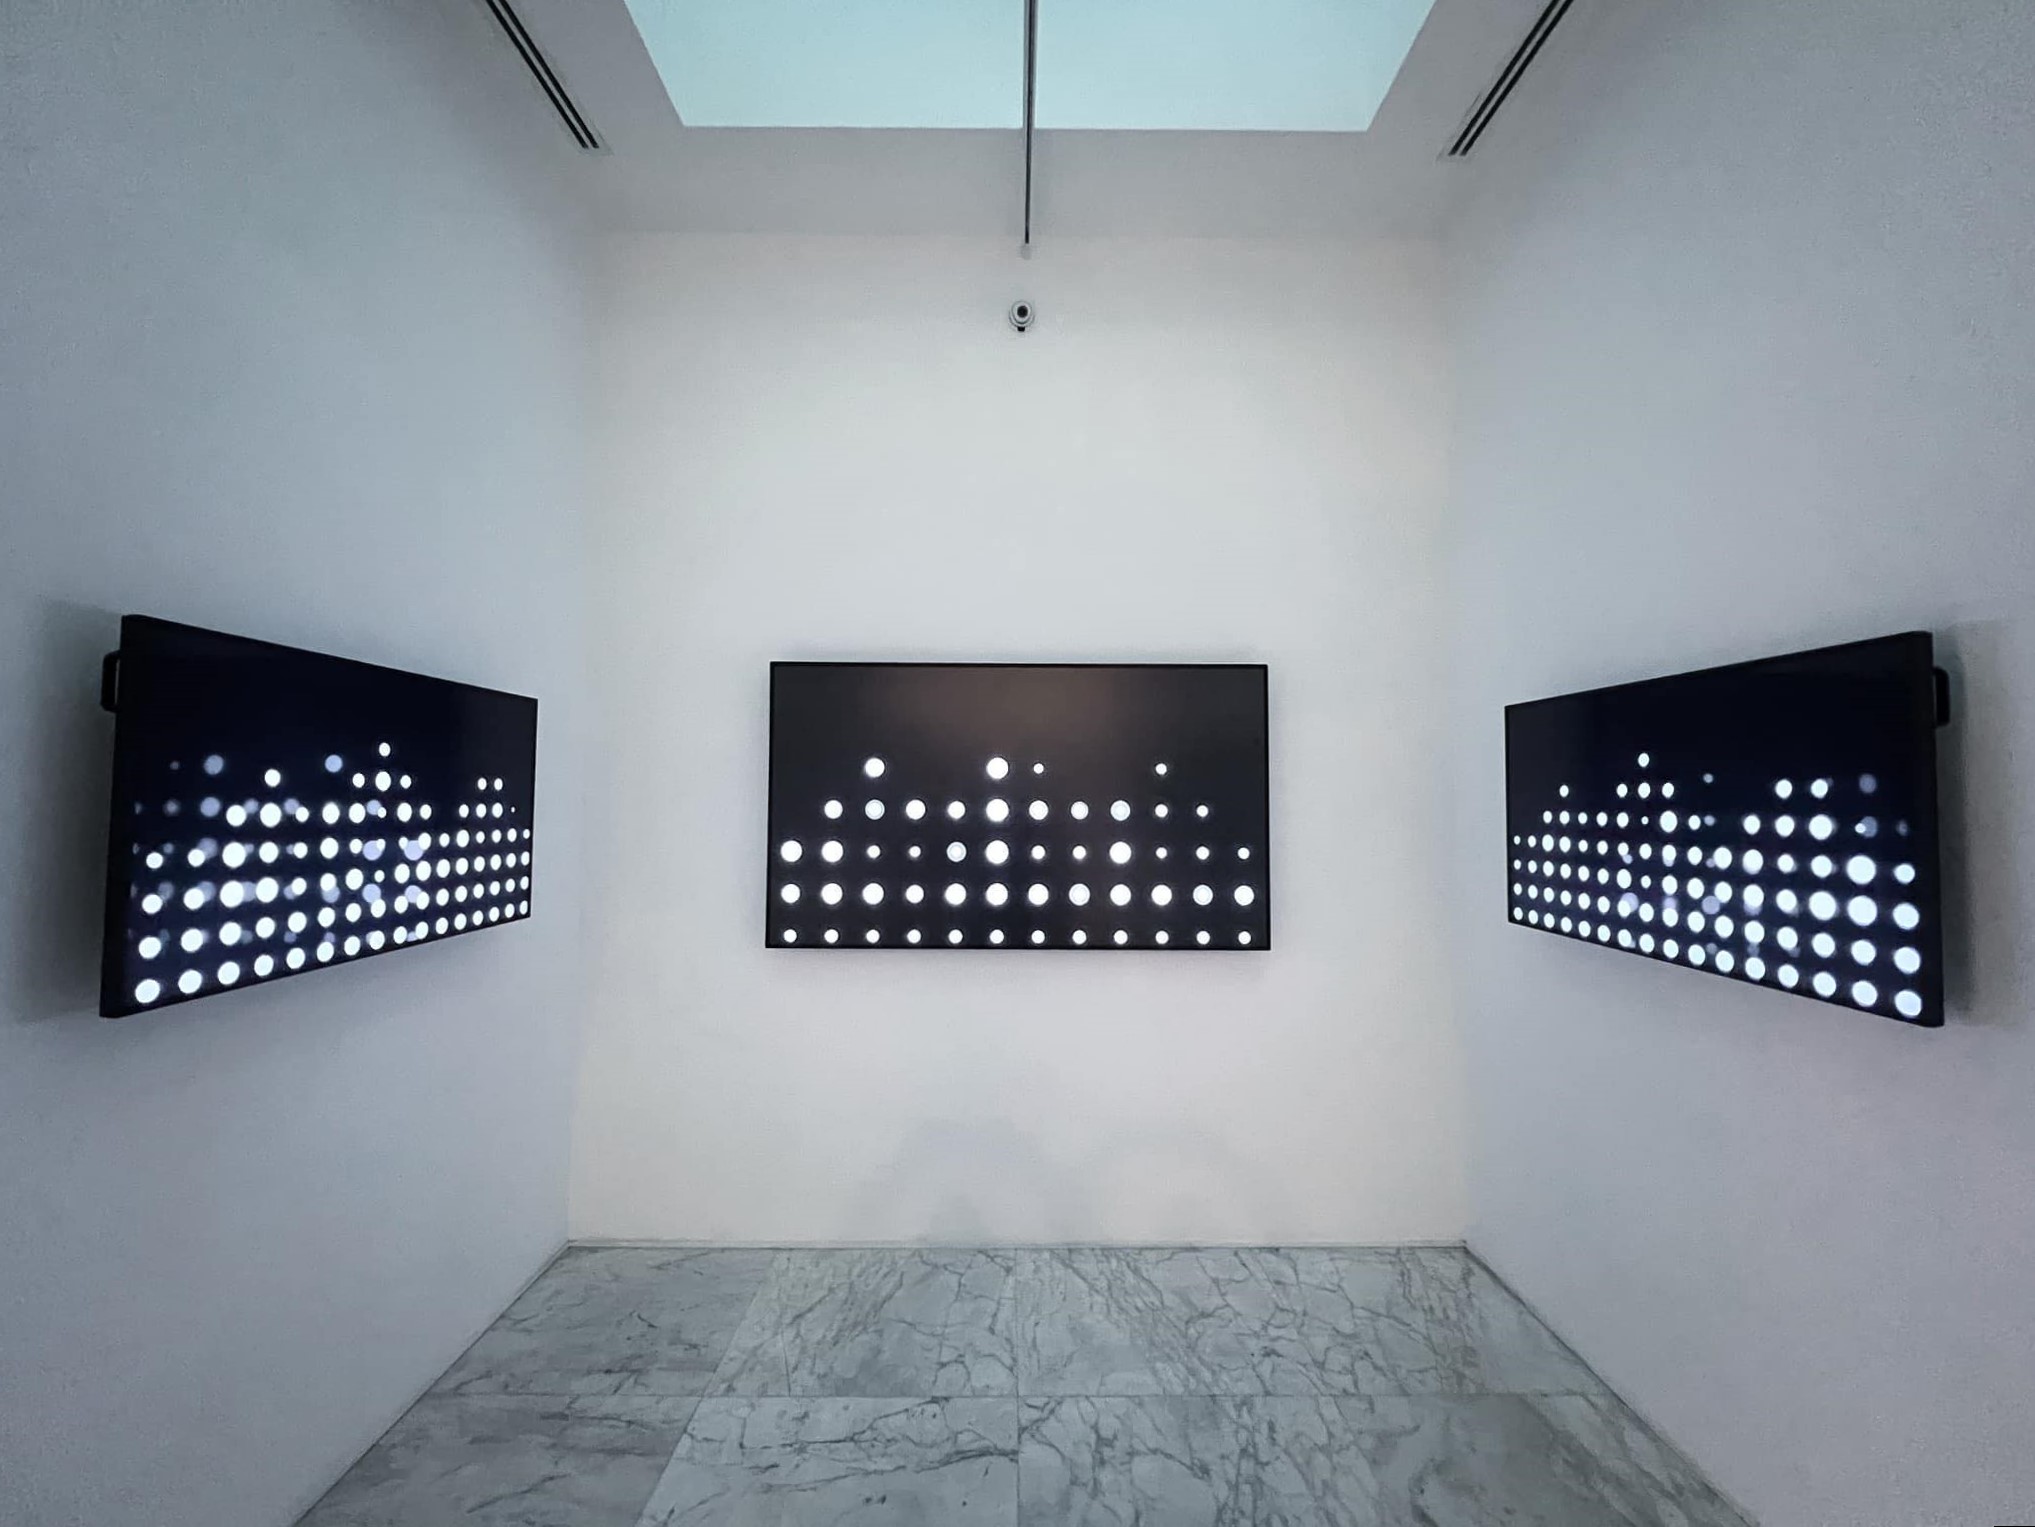 PHYSIS and RENDERING, Vincenzo Marsiglia, installation view, Ph. Luca Perazzolo